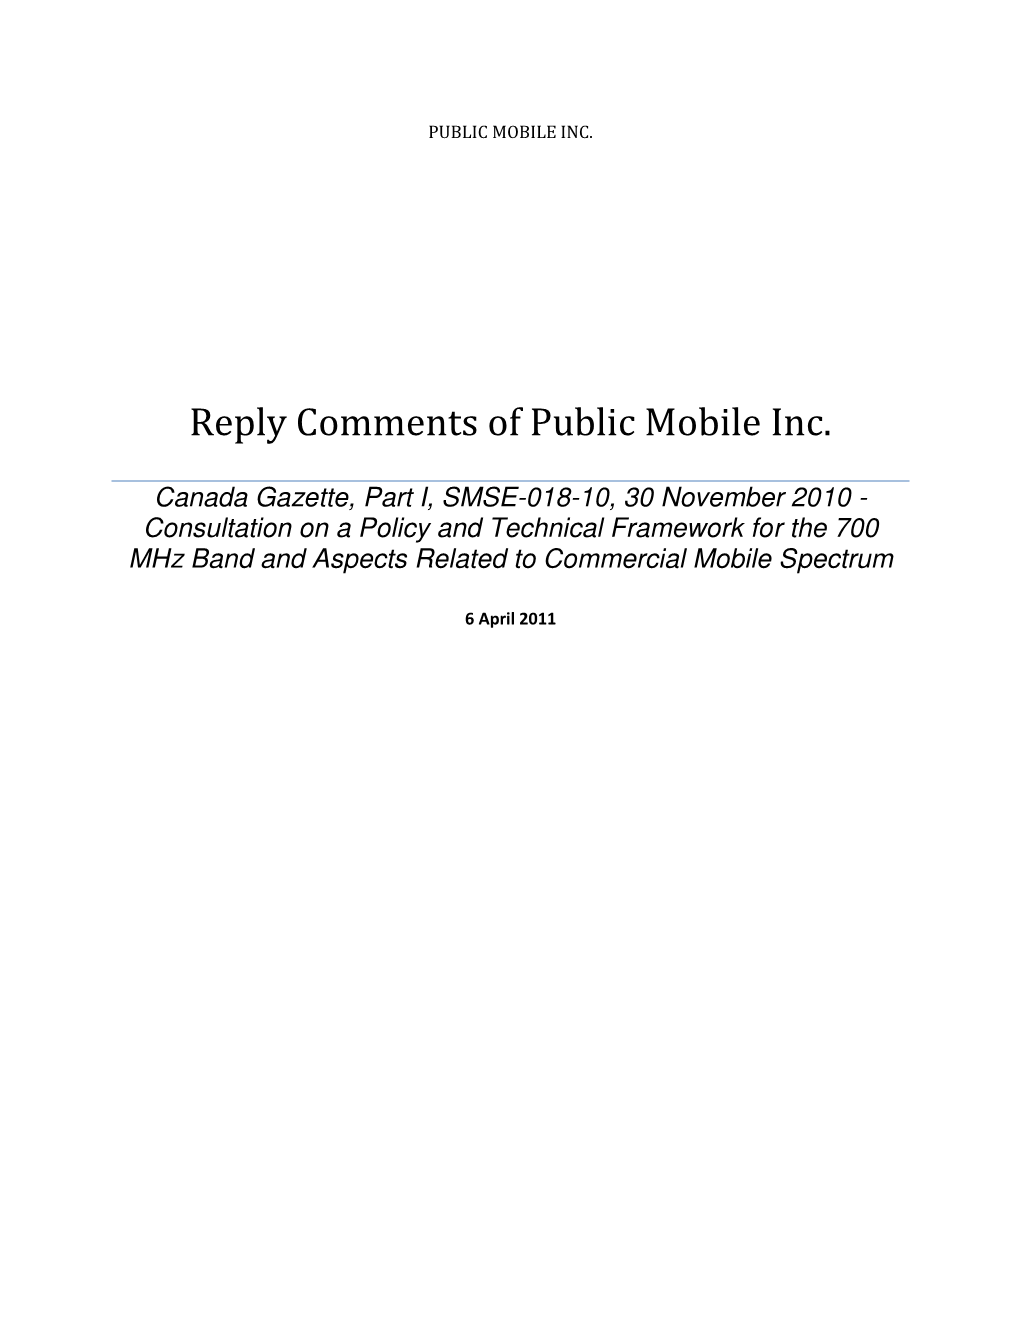 Reply Comments of Public Mobile Inc